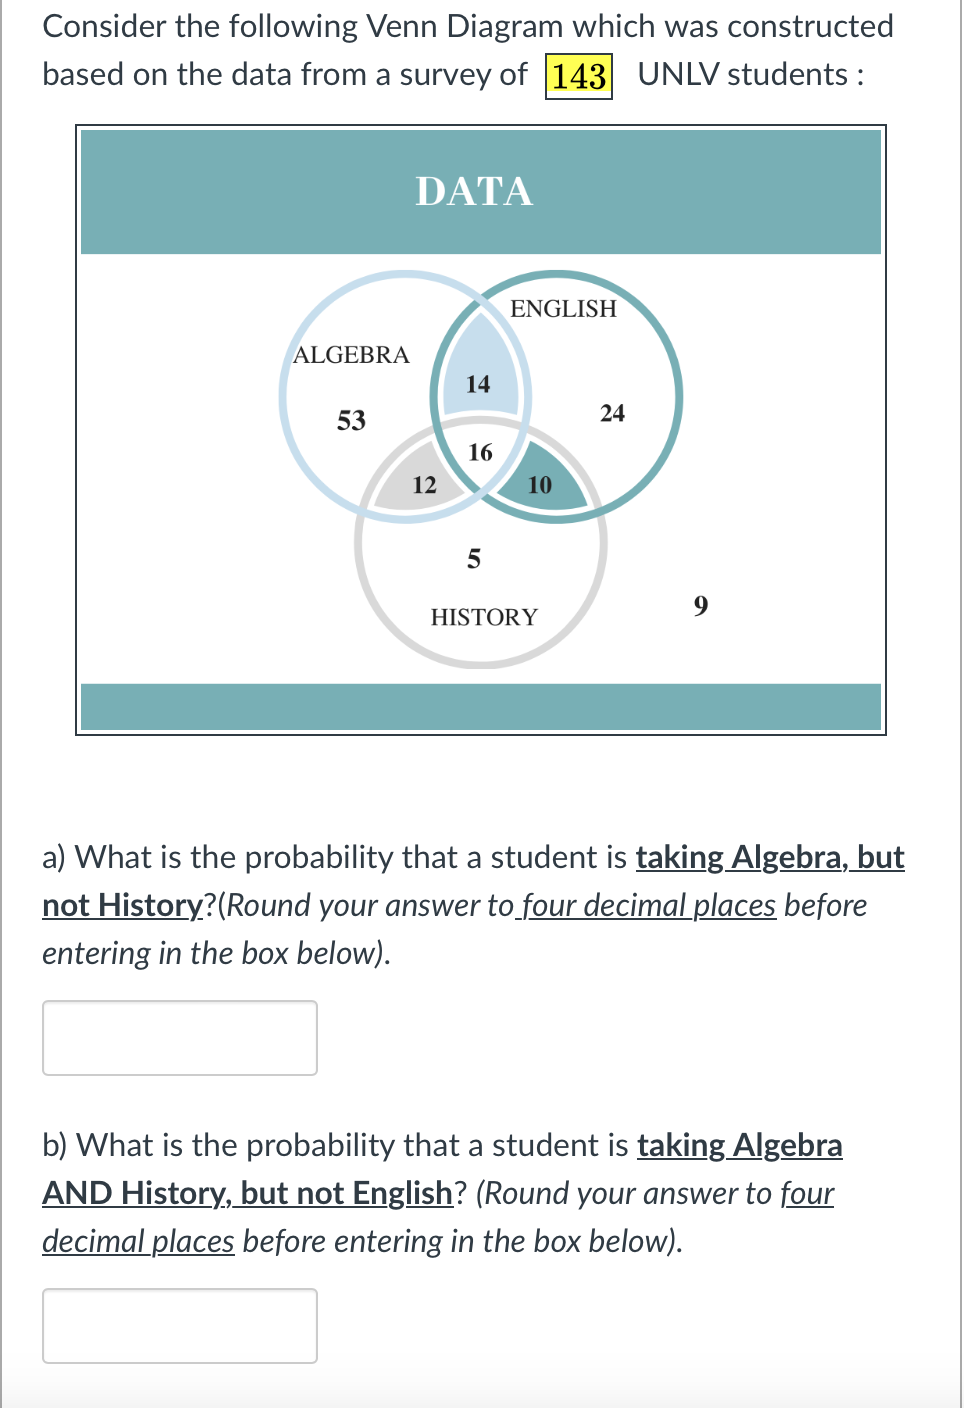 Consider the following Venn Diagram which was constructed
based on the data from a survey of 143 UNLV students:
ALGEBRA
53
DATA
12
14
16
5
ENGLISH
10
HISTORY
24
a) What is the probability that a student is taking Algebra, but
not History? (Round your answer to four decimal places before
entering in the box below).
b) What is the probability that a student is taking Algebra
AND History, but not English? (Round your answer to four
decimal places before entering in the box below).